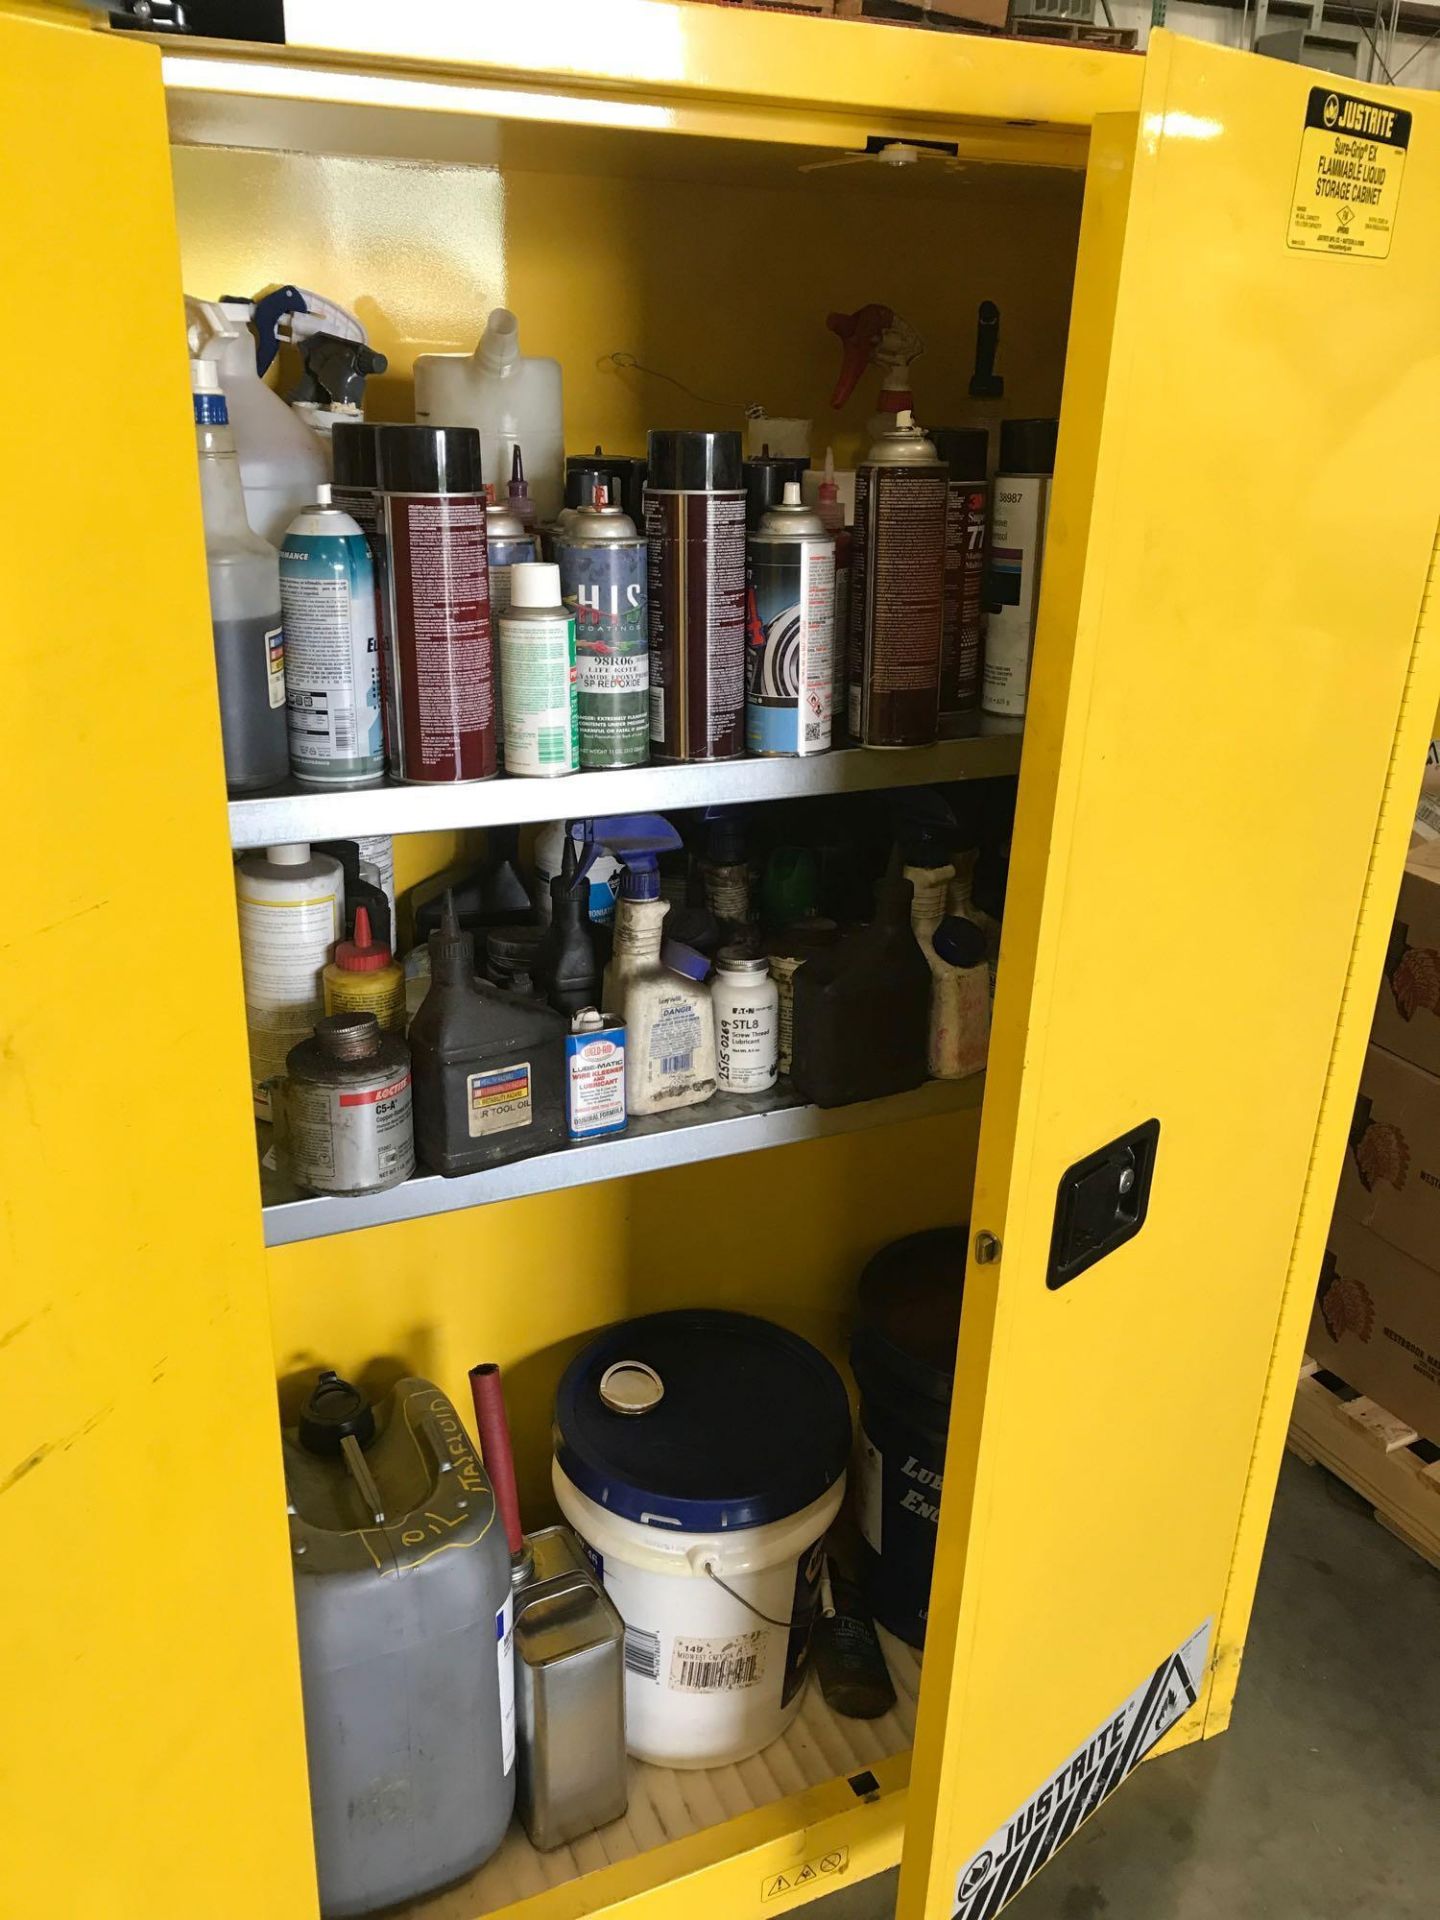 JUSTRITE SURE-GRIP EX FLAMMABLE LIQUID STORAGE CABINET WITH CONTENTS - Image 4 of 4